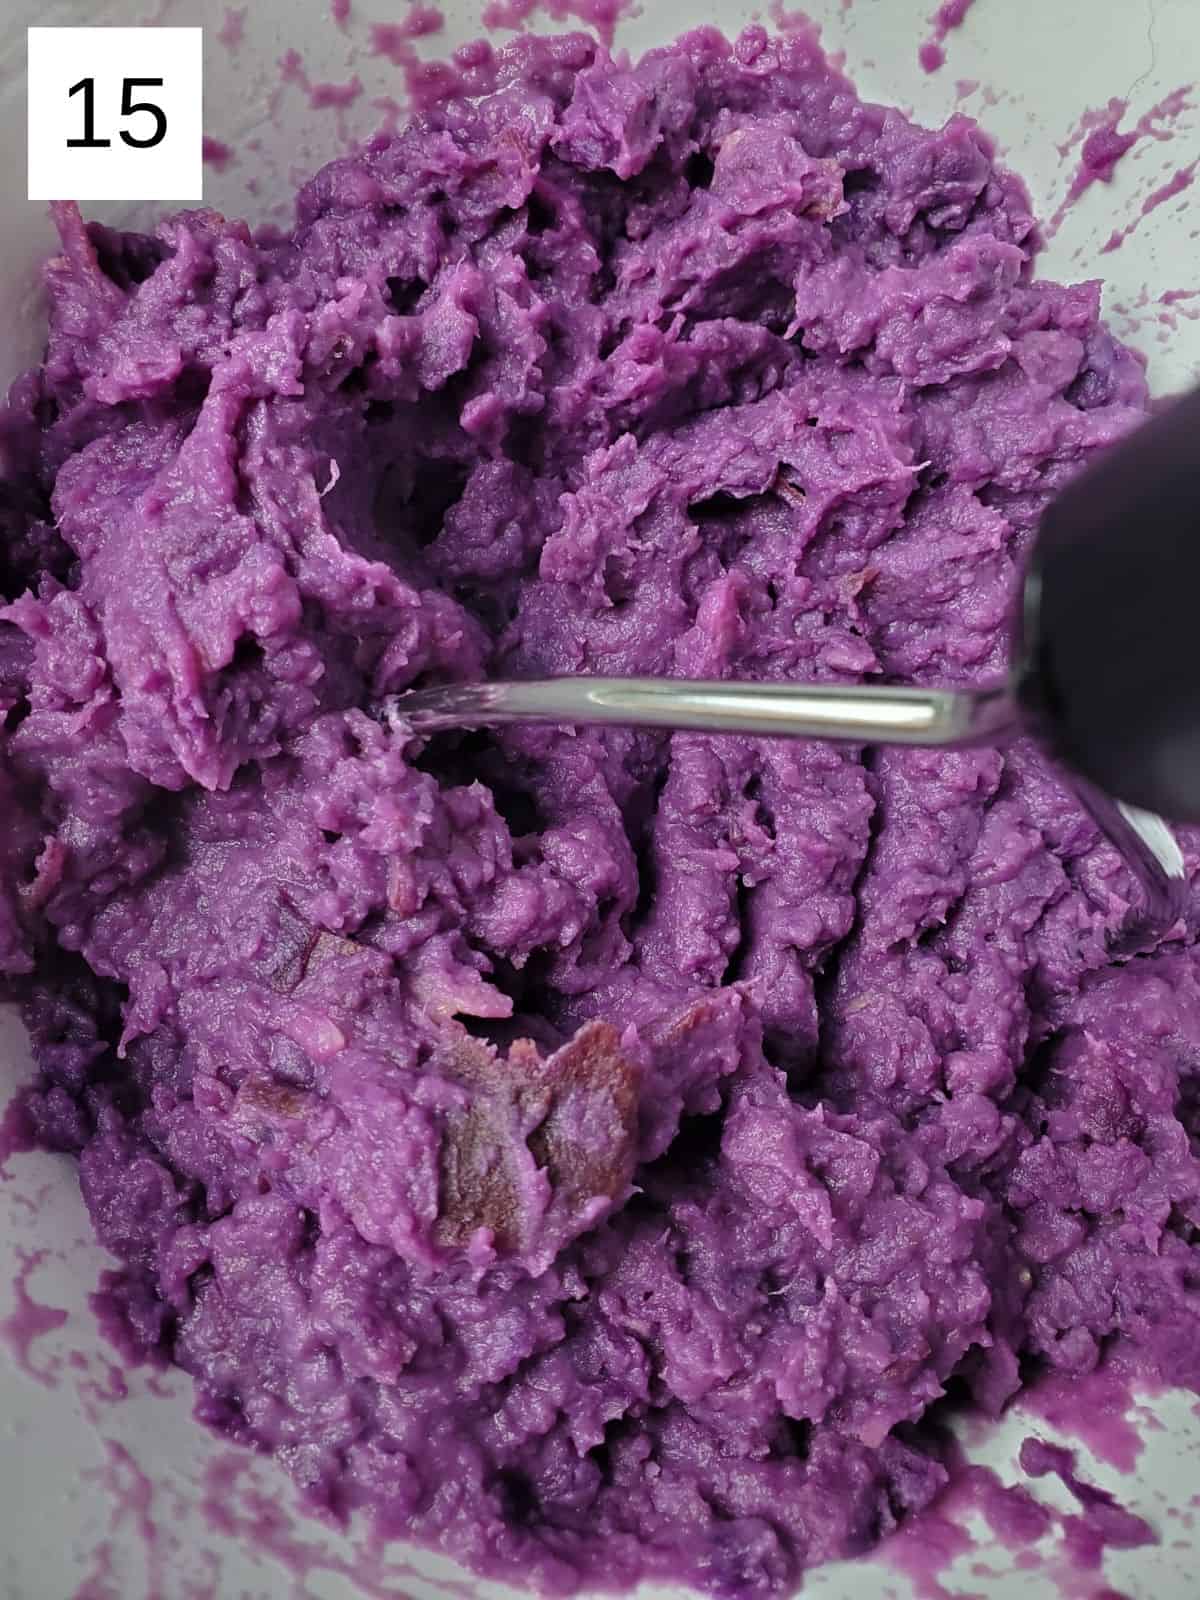 final mashed purple sweet potato mixture in a bowl.